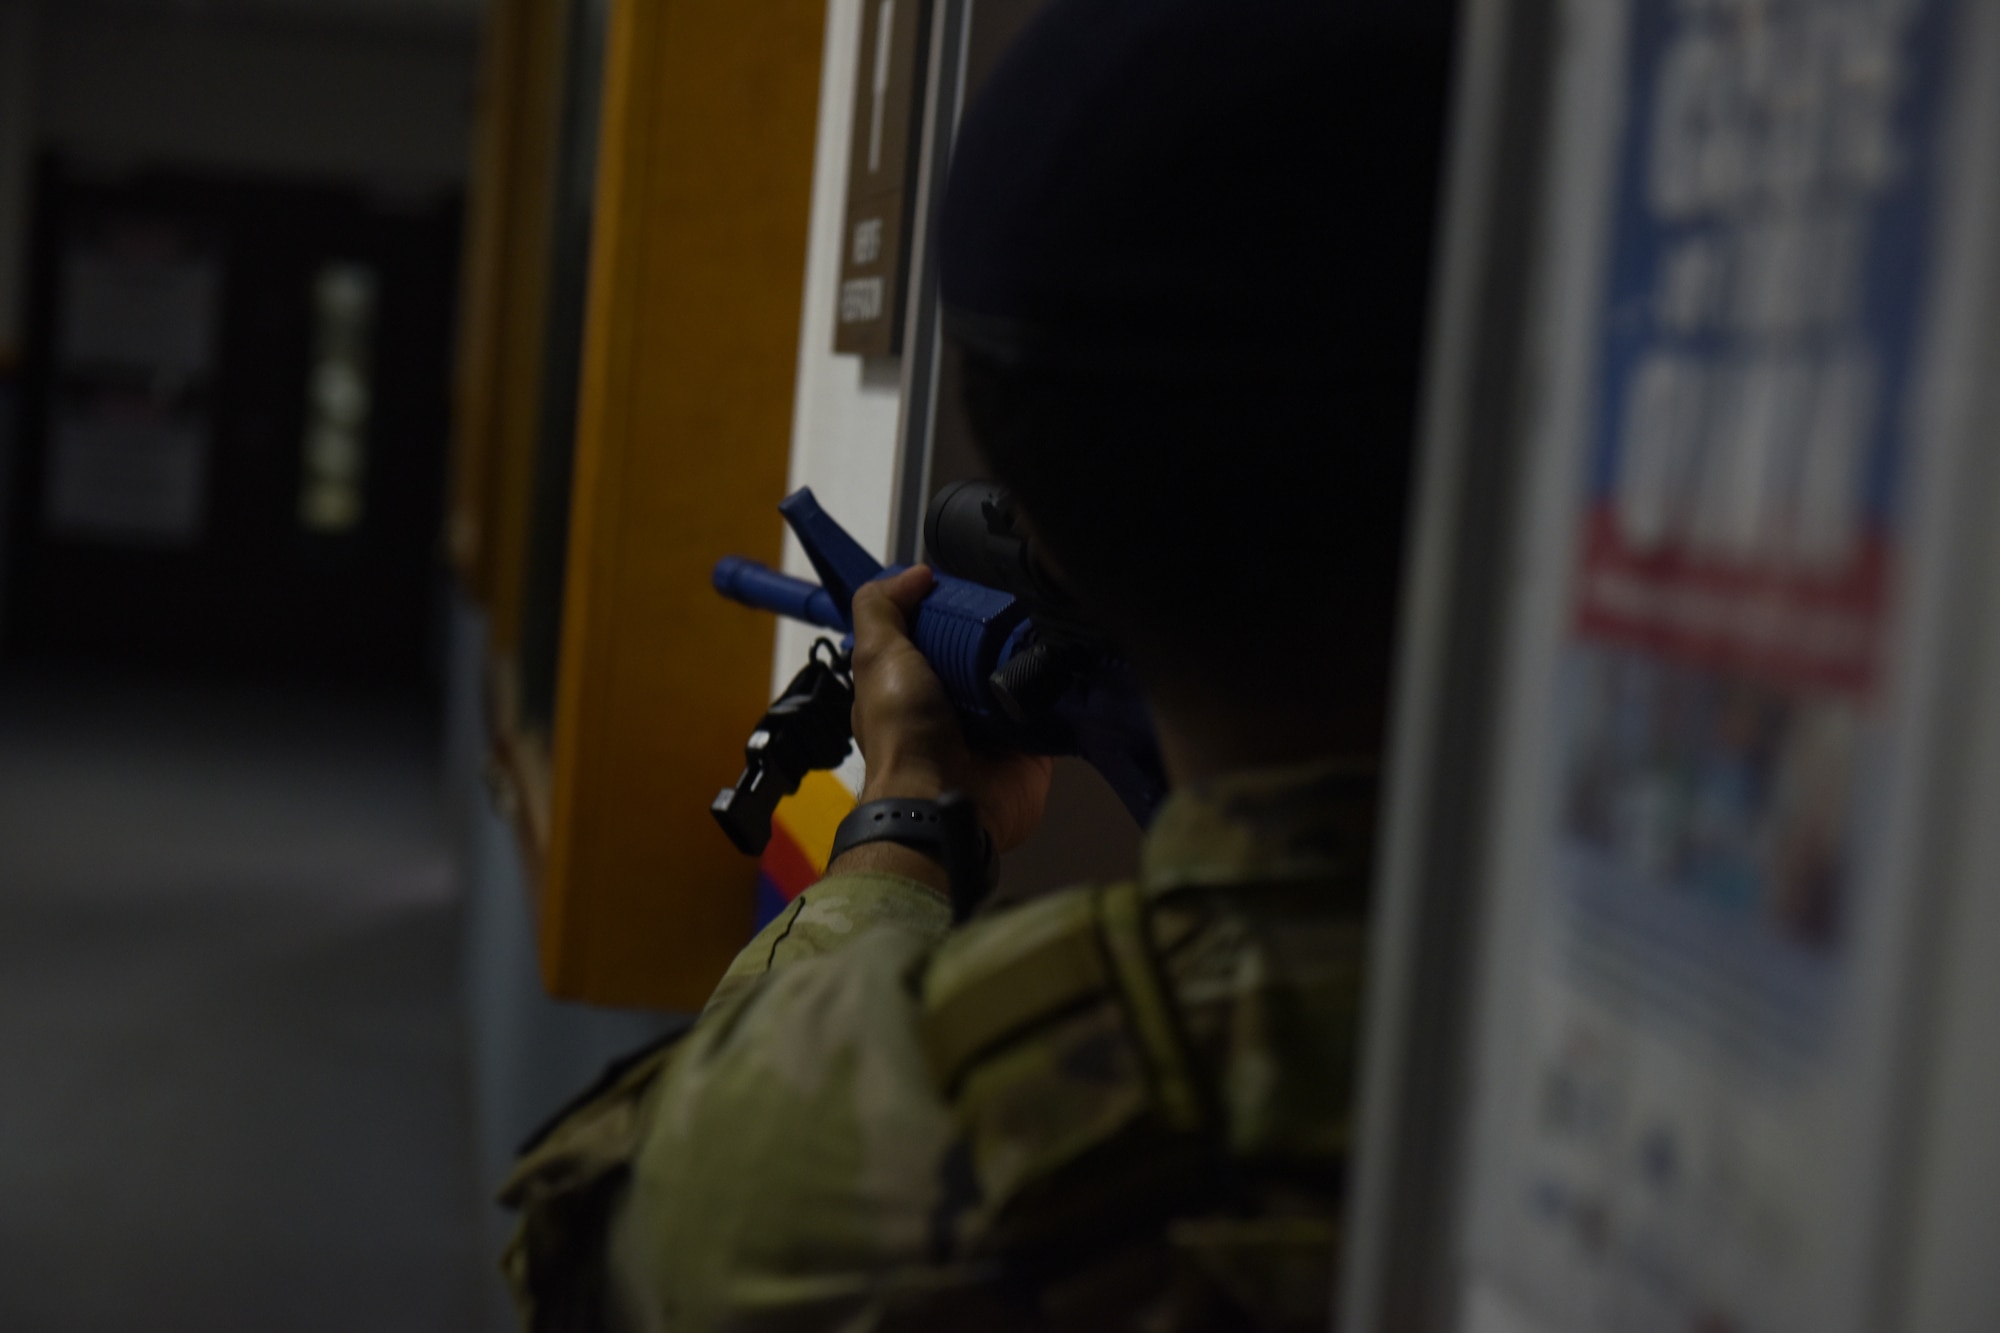 Man uses rubber firearm to clear a hallway during an active shooter simulation